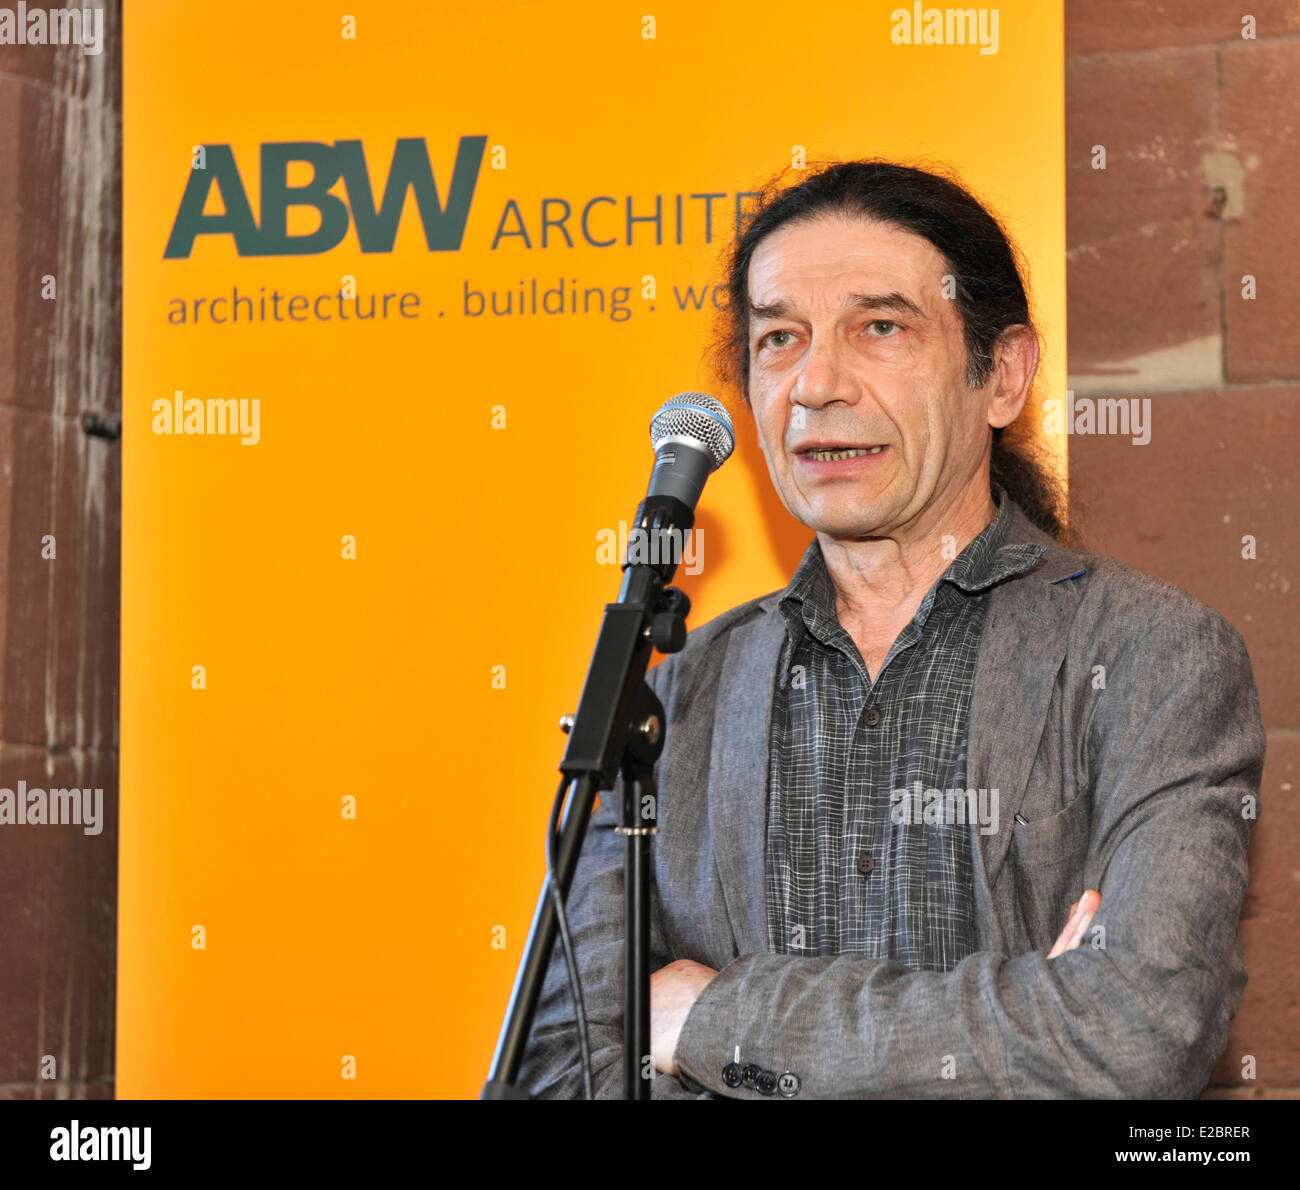 Liverpool UK 18th June 2014. Liverpool Art Prize Winner 2014 is announced as Tabitha Jussa. She also won the Peoples Choice Award. Photo shows Pavel Bulcher, Judge Credit:  GeoPic / Alamy Live News Stock Photo